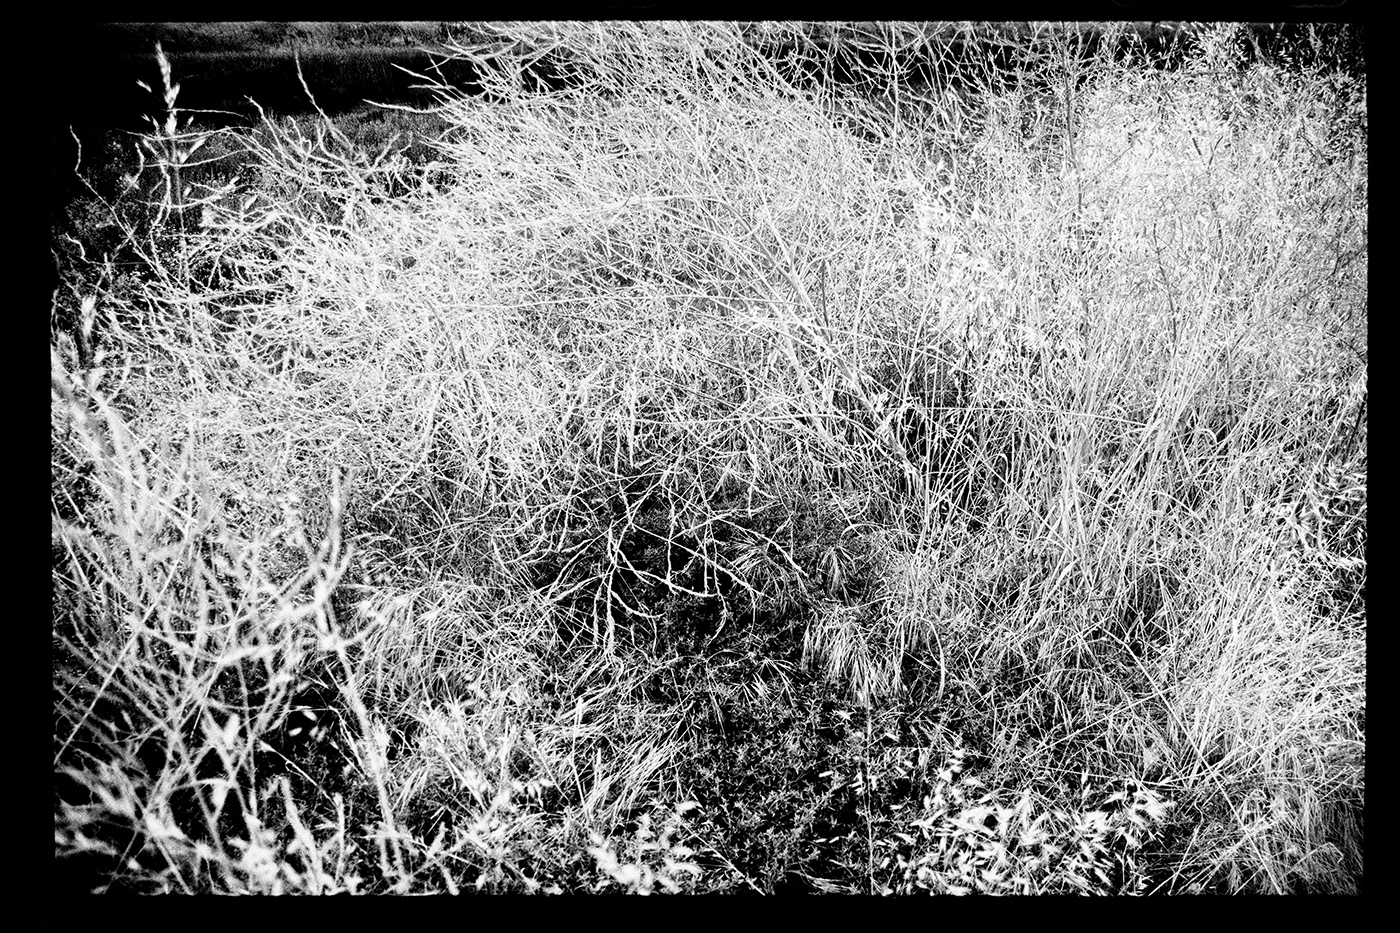 Outdoor Landscape bwphotography 35mm analog photography black and white